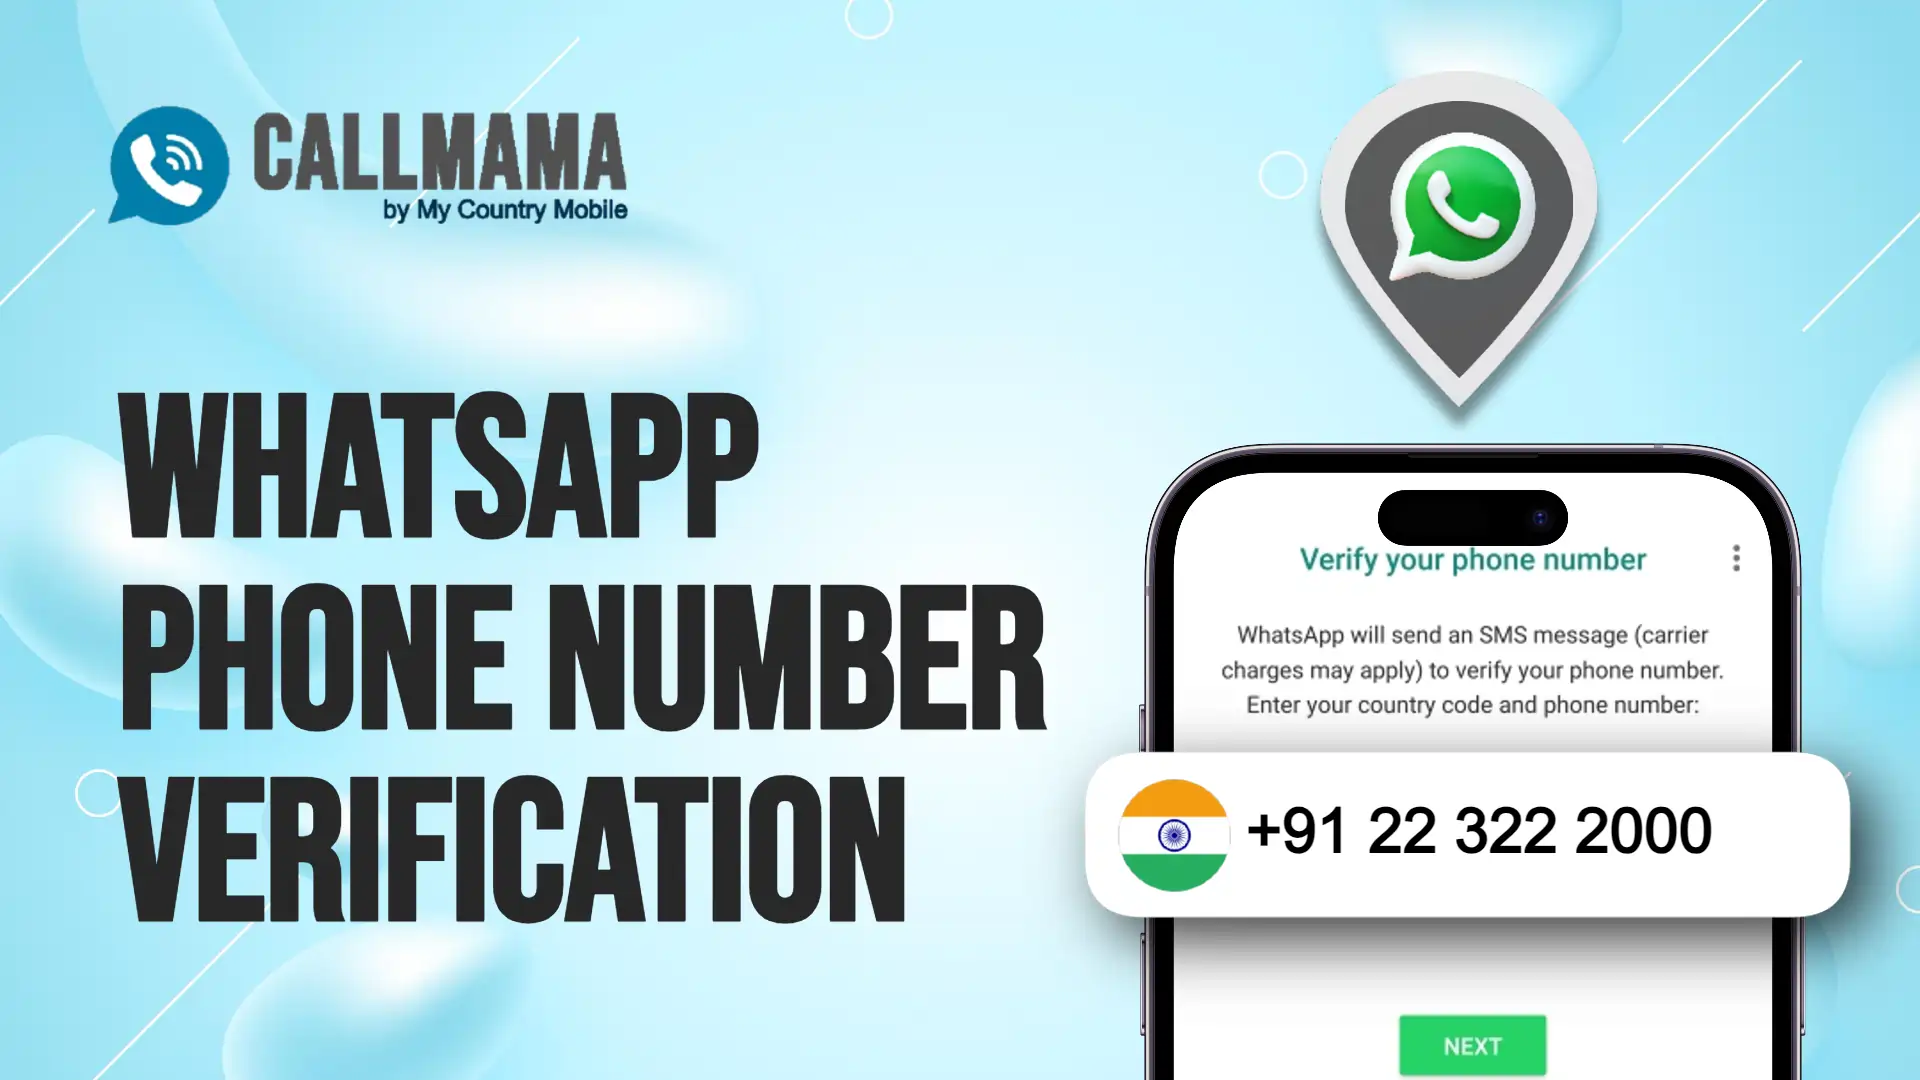 Virtual Number for WhatsApp